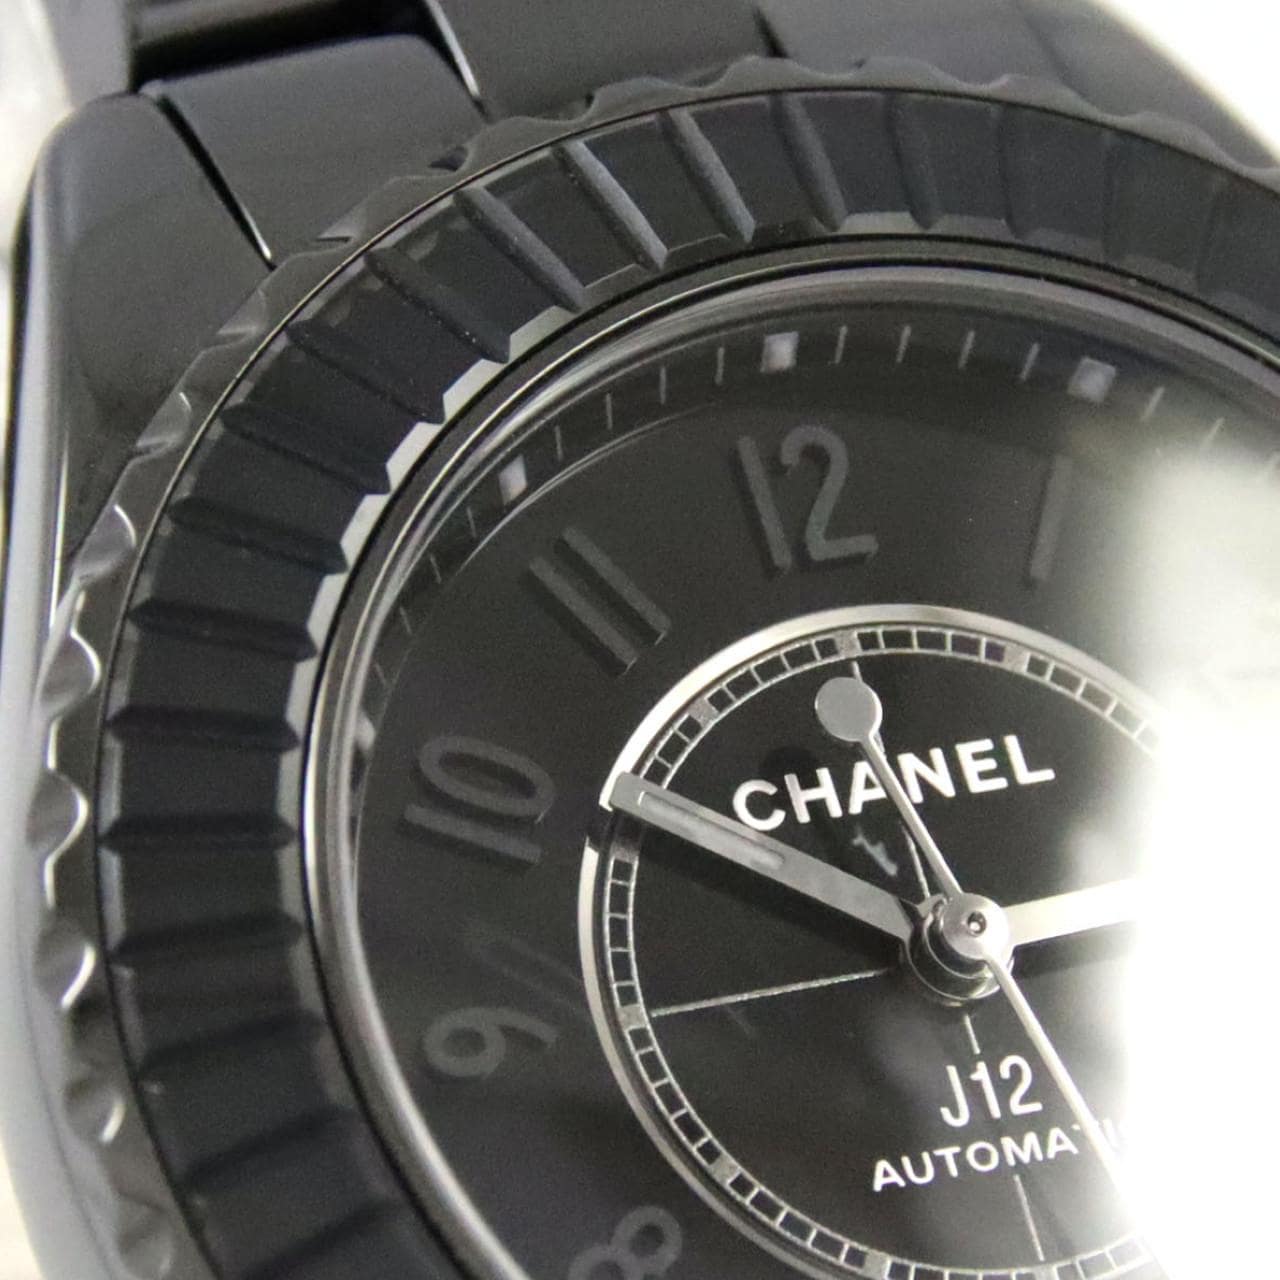 CHANEL J12 Calibre 12.2 Edition 1 33mm 陶瓷 LIMITED H6784 陶瓷自动上弦